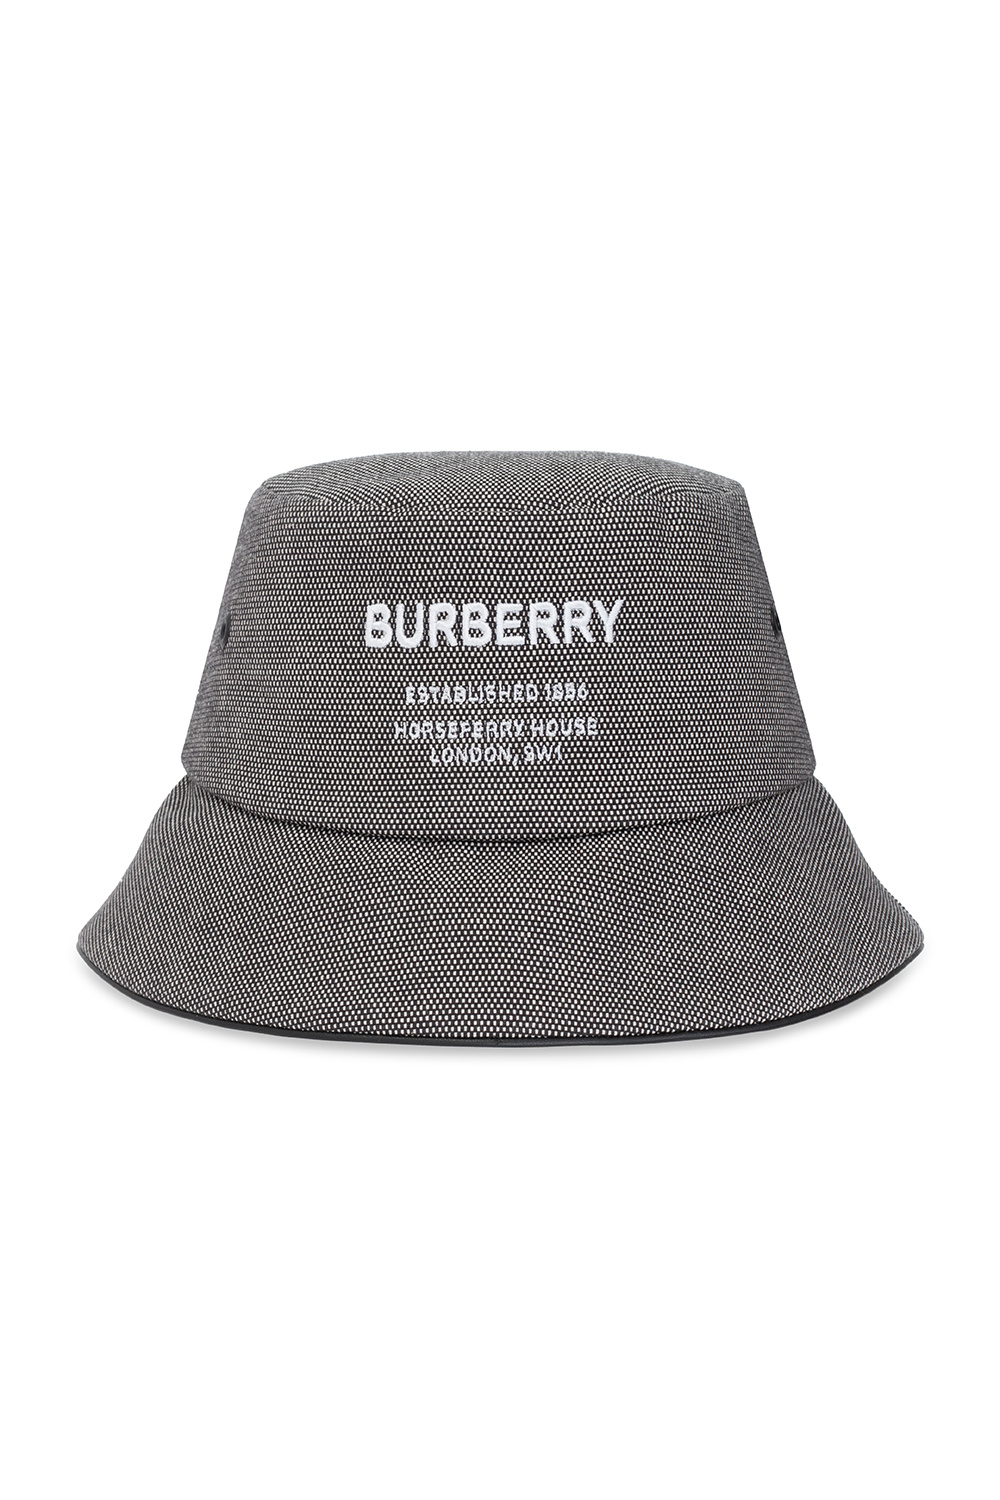 Burberry Suede toe cap and heel patch